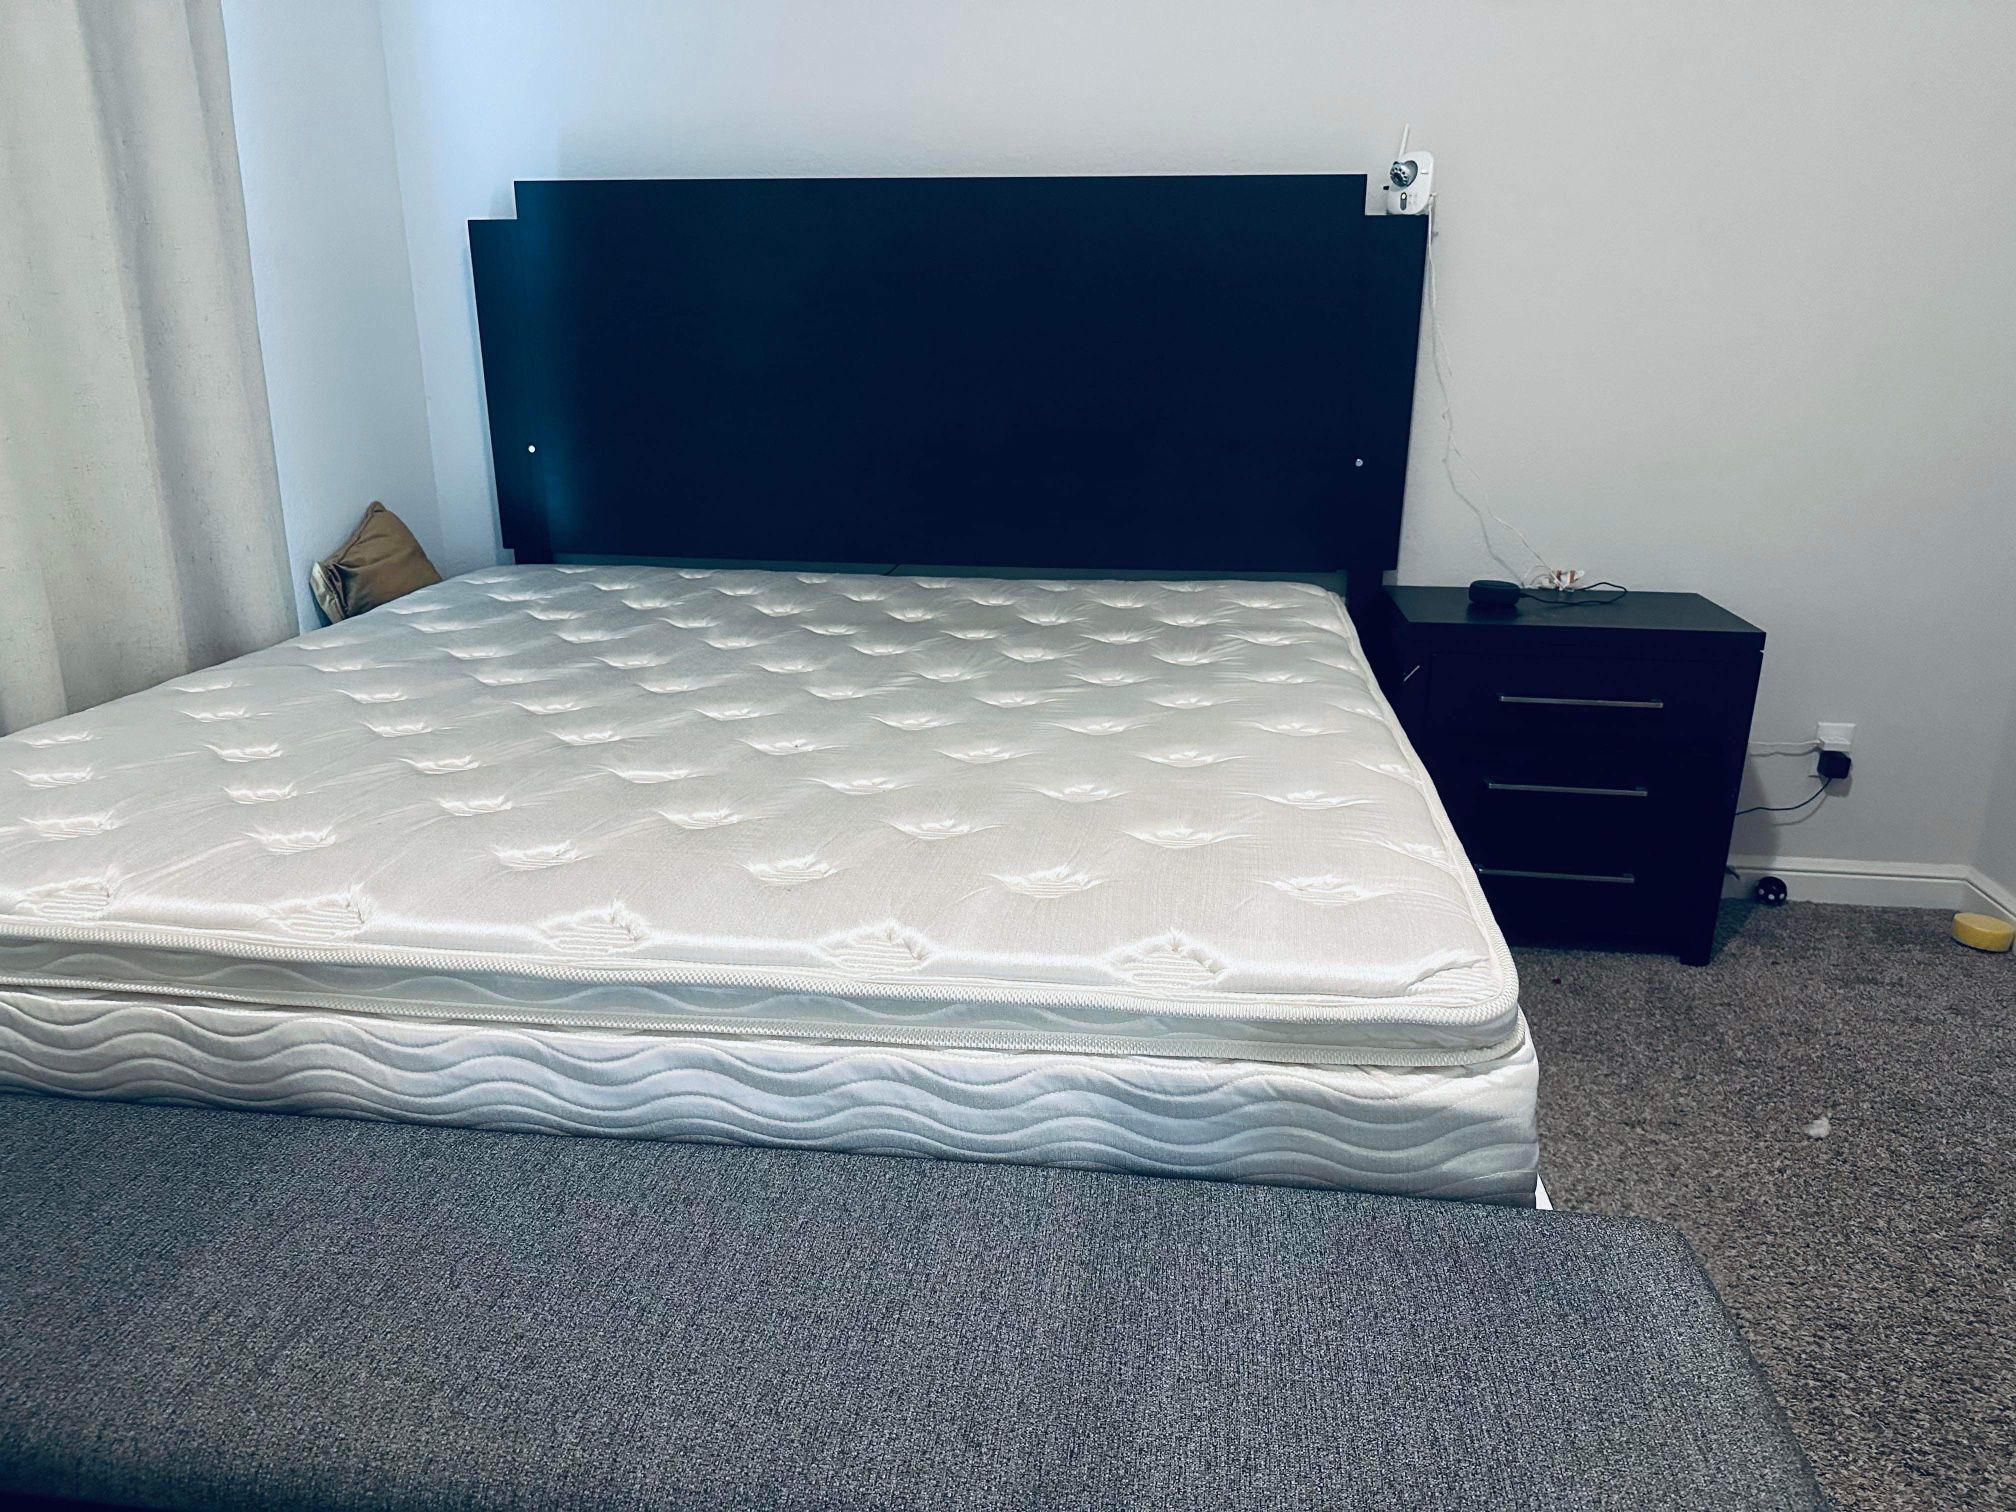 King bed frame with box mattress and headboard all included